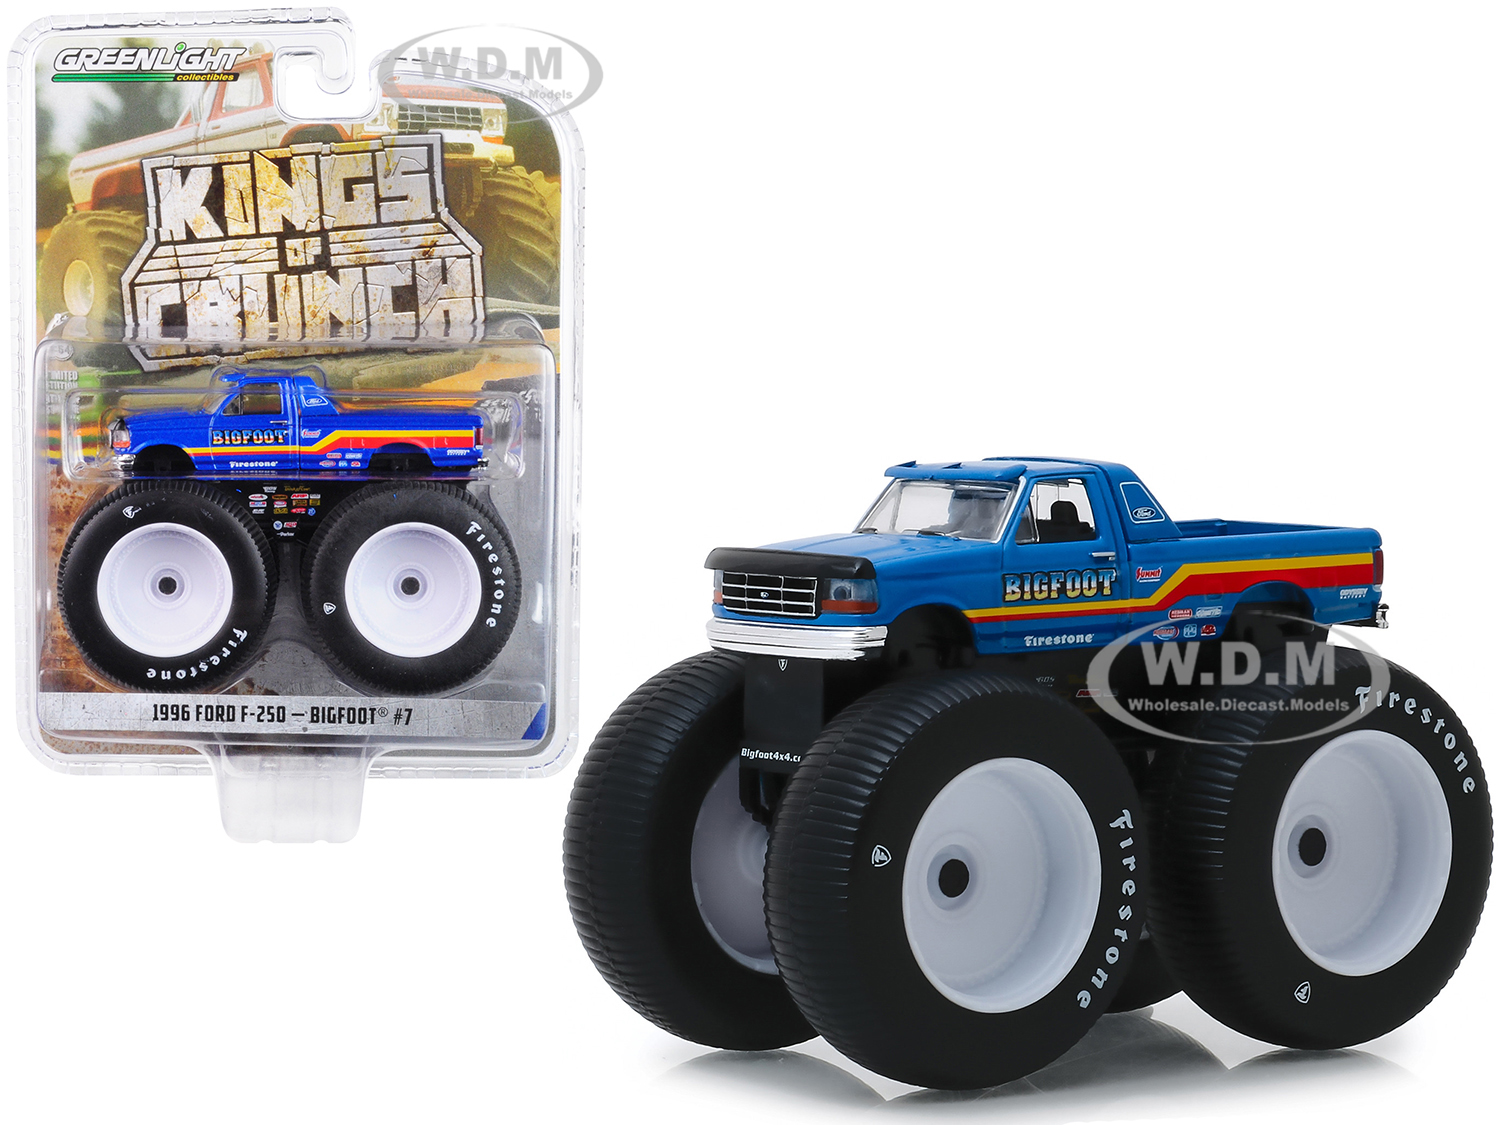 1996 Ford F-250 Monster Truck Bigfoot #7 Metallic Blue with Stripes Kings of Crunch Series 5 1/64 Diecast Model Car by Greenlight